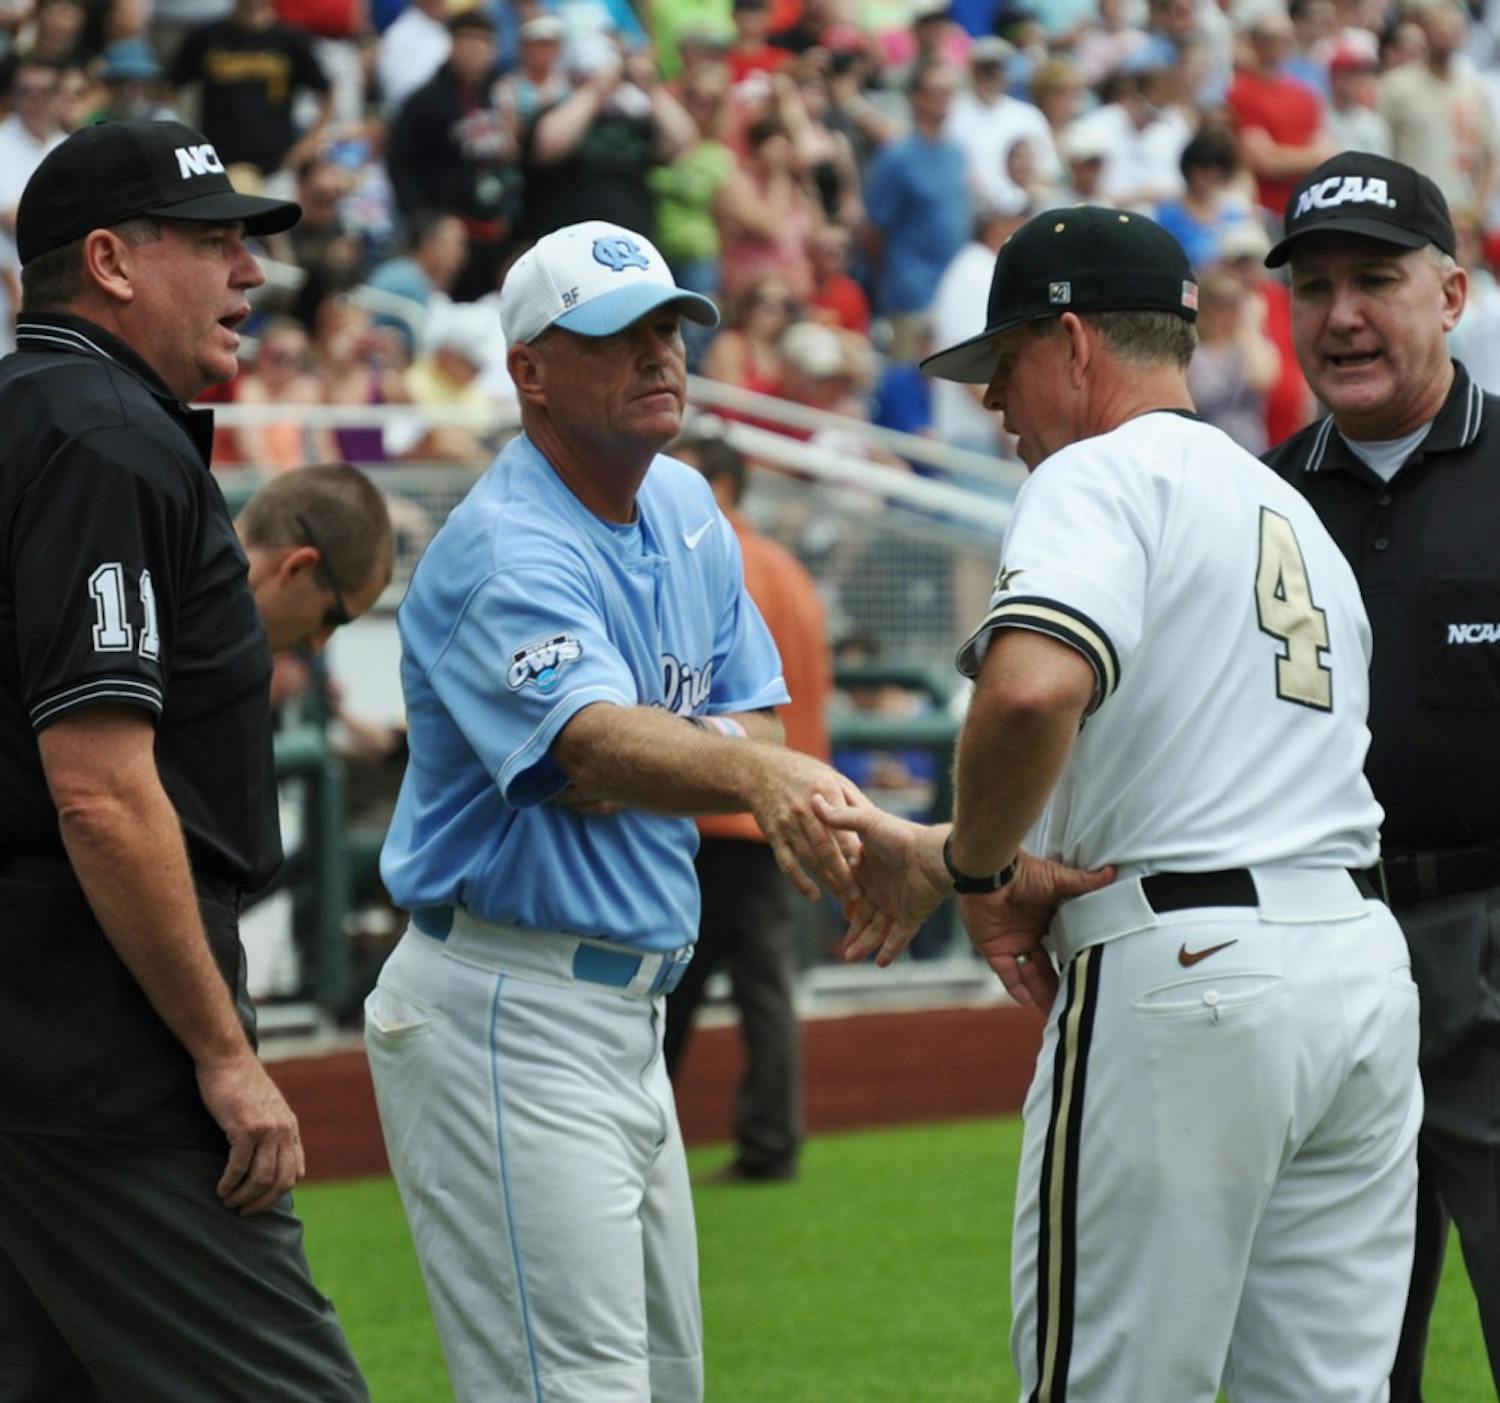 Photo: Tar Heels fall in College World Series (Kelly Parsons)